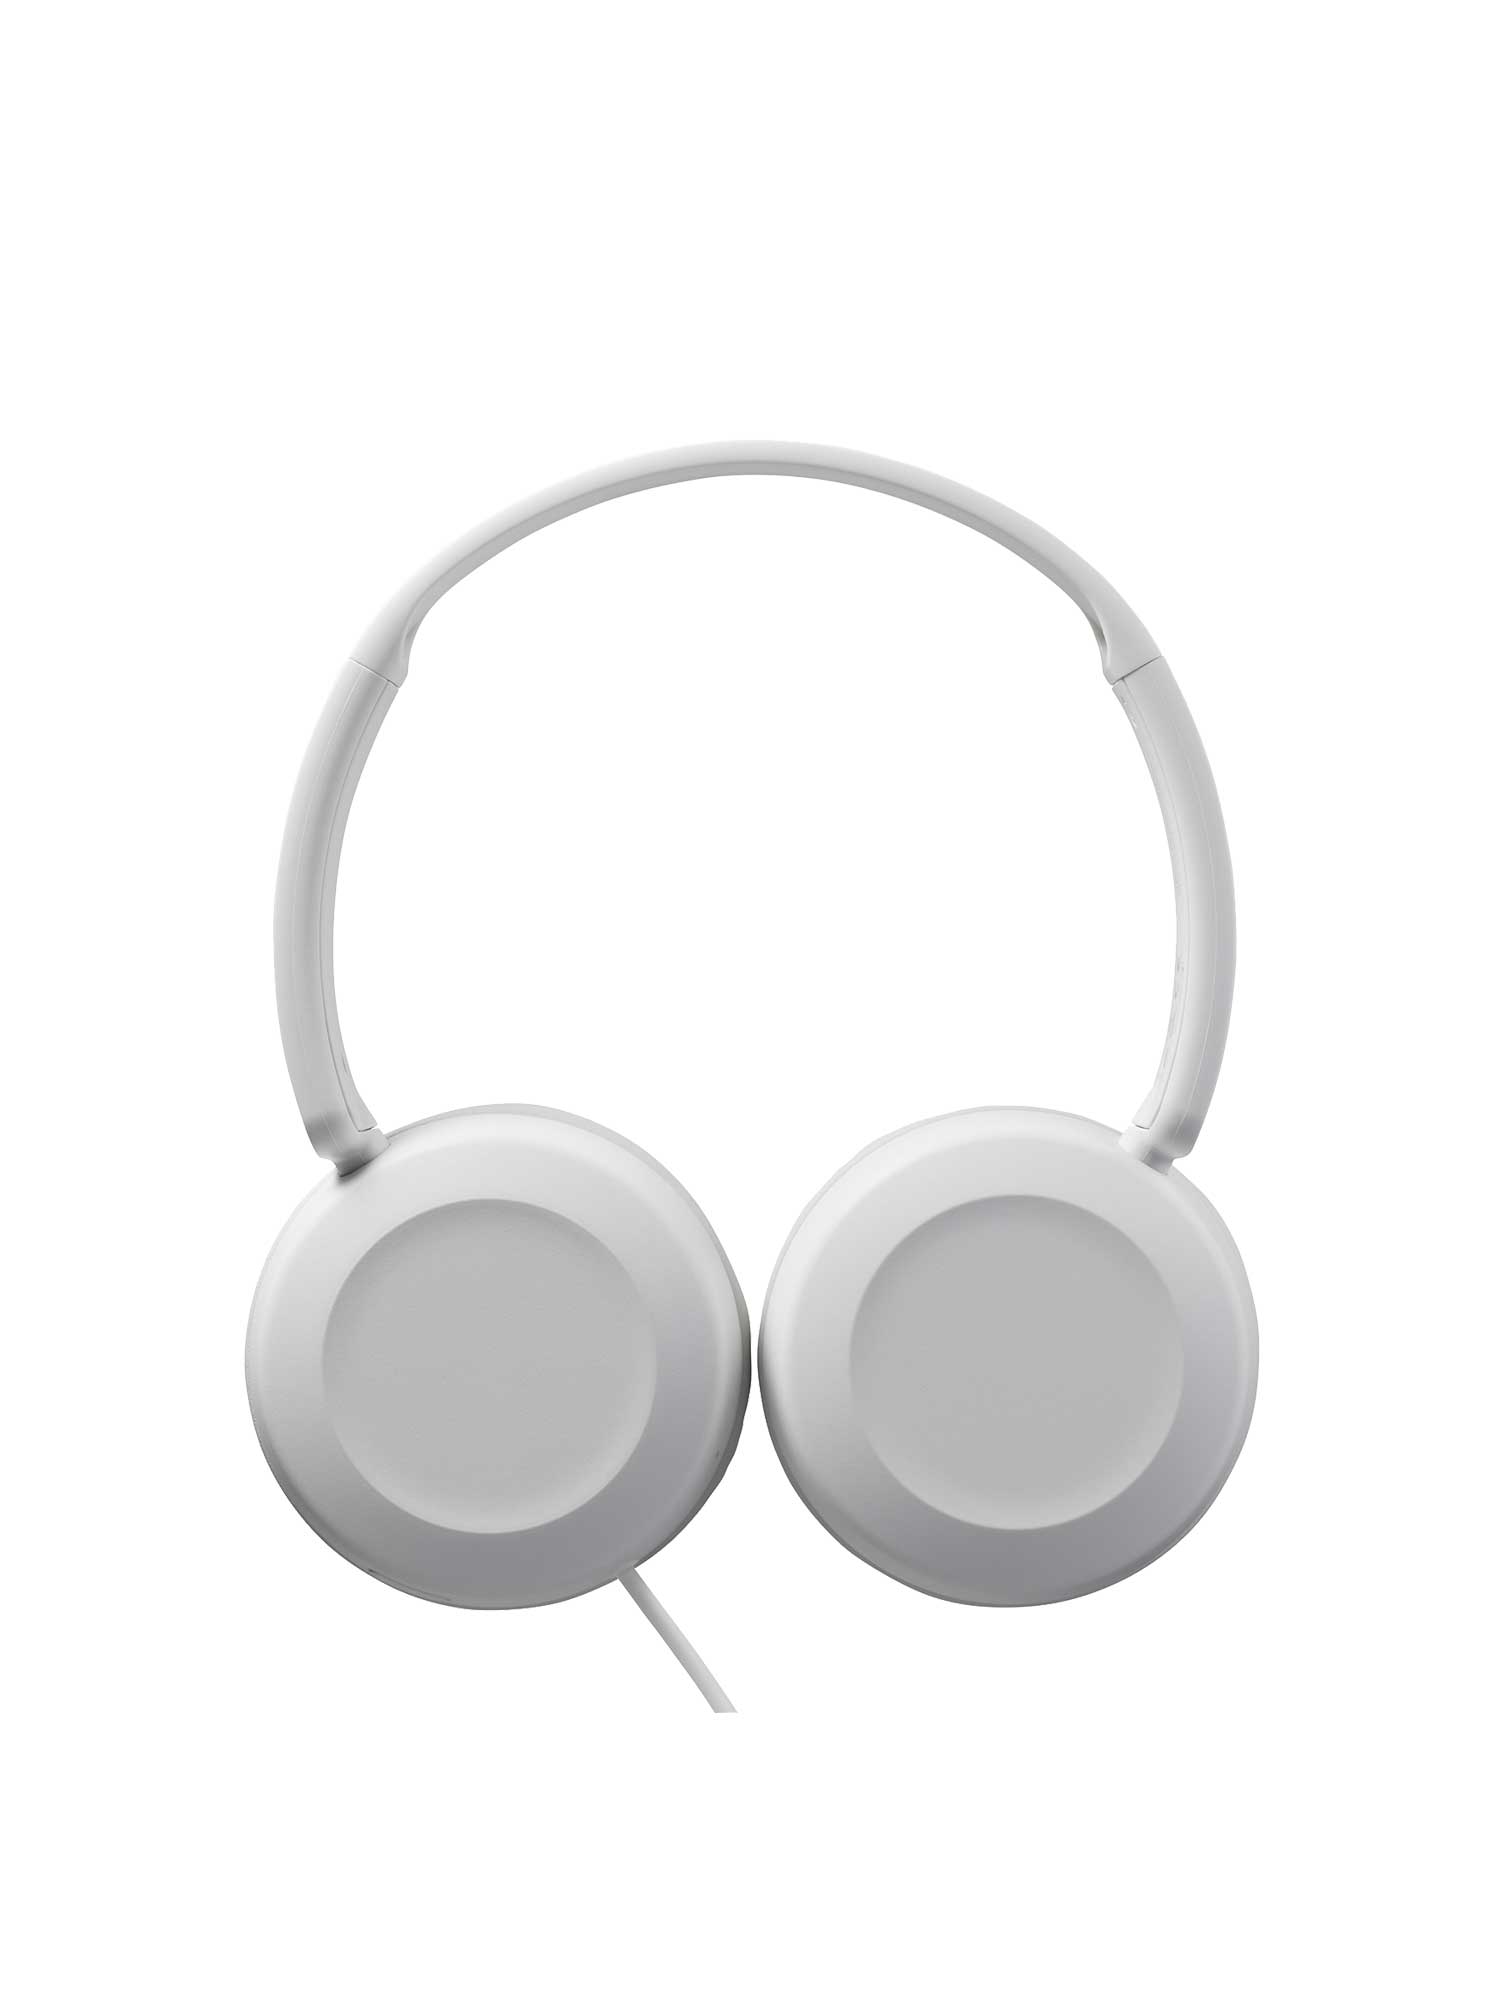 HA-S31M-W wired on-ear headphones swivel design for easy storage in your bag